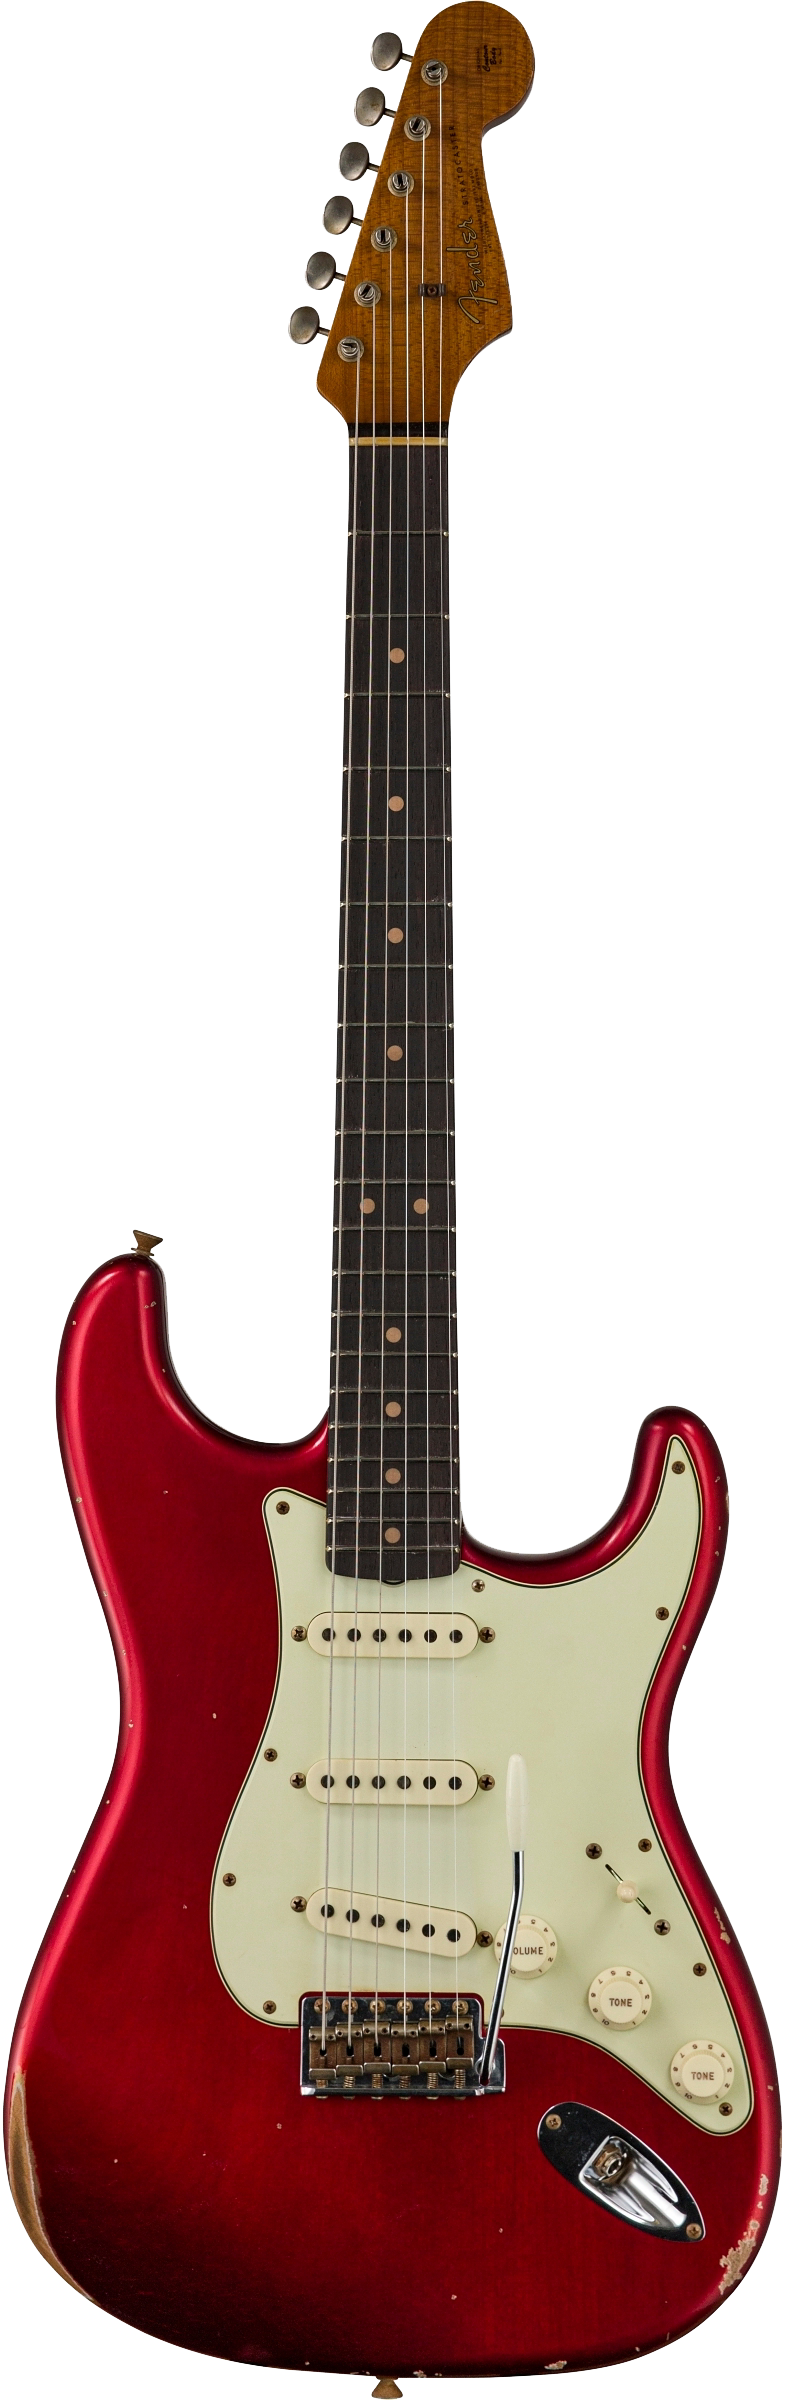 Fender Custom Shop Limited Edition 63 Strat Relic Aged Candy Apple 